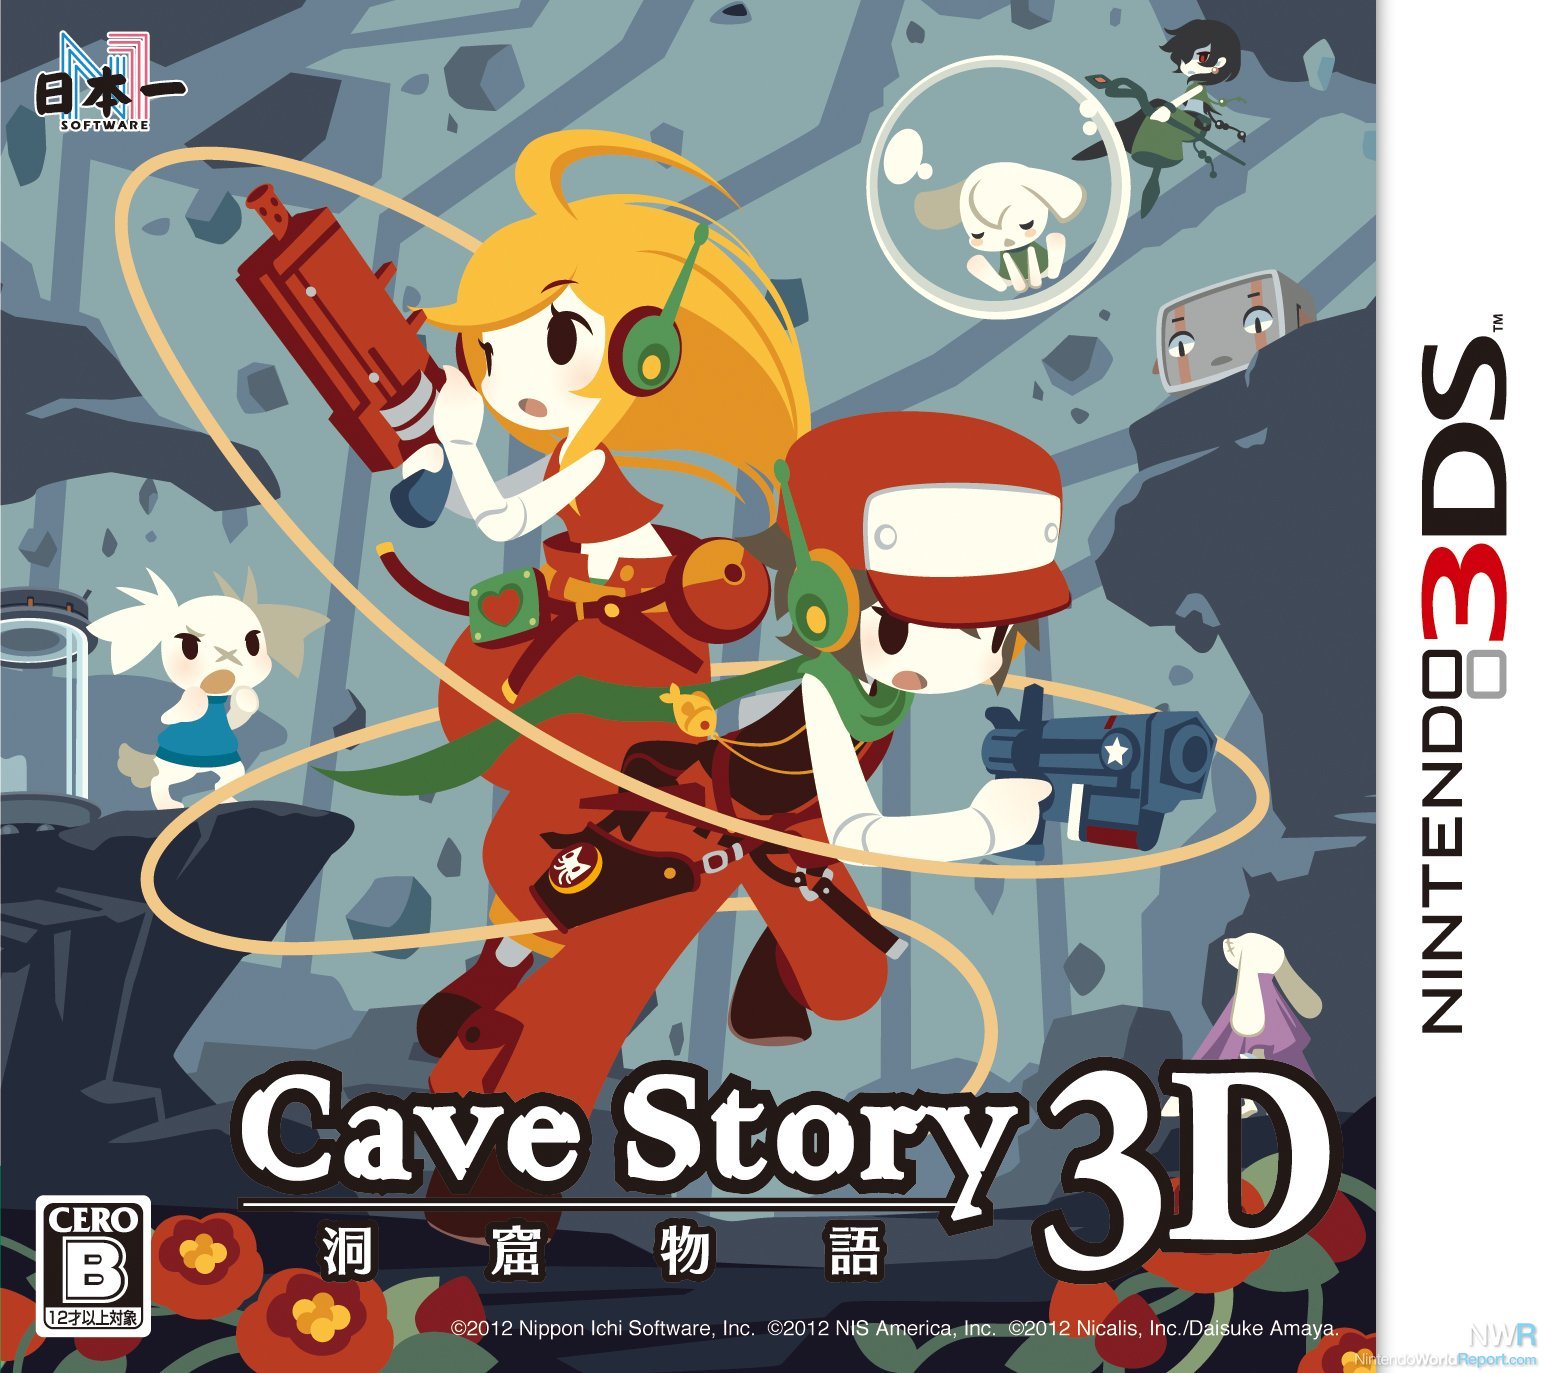 Cave Story 3D Review - Review - Nintendo World Report